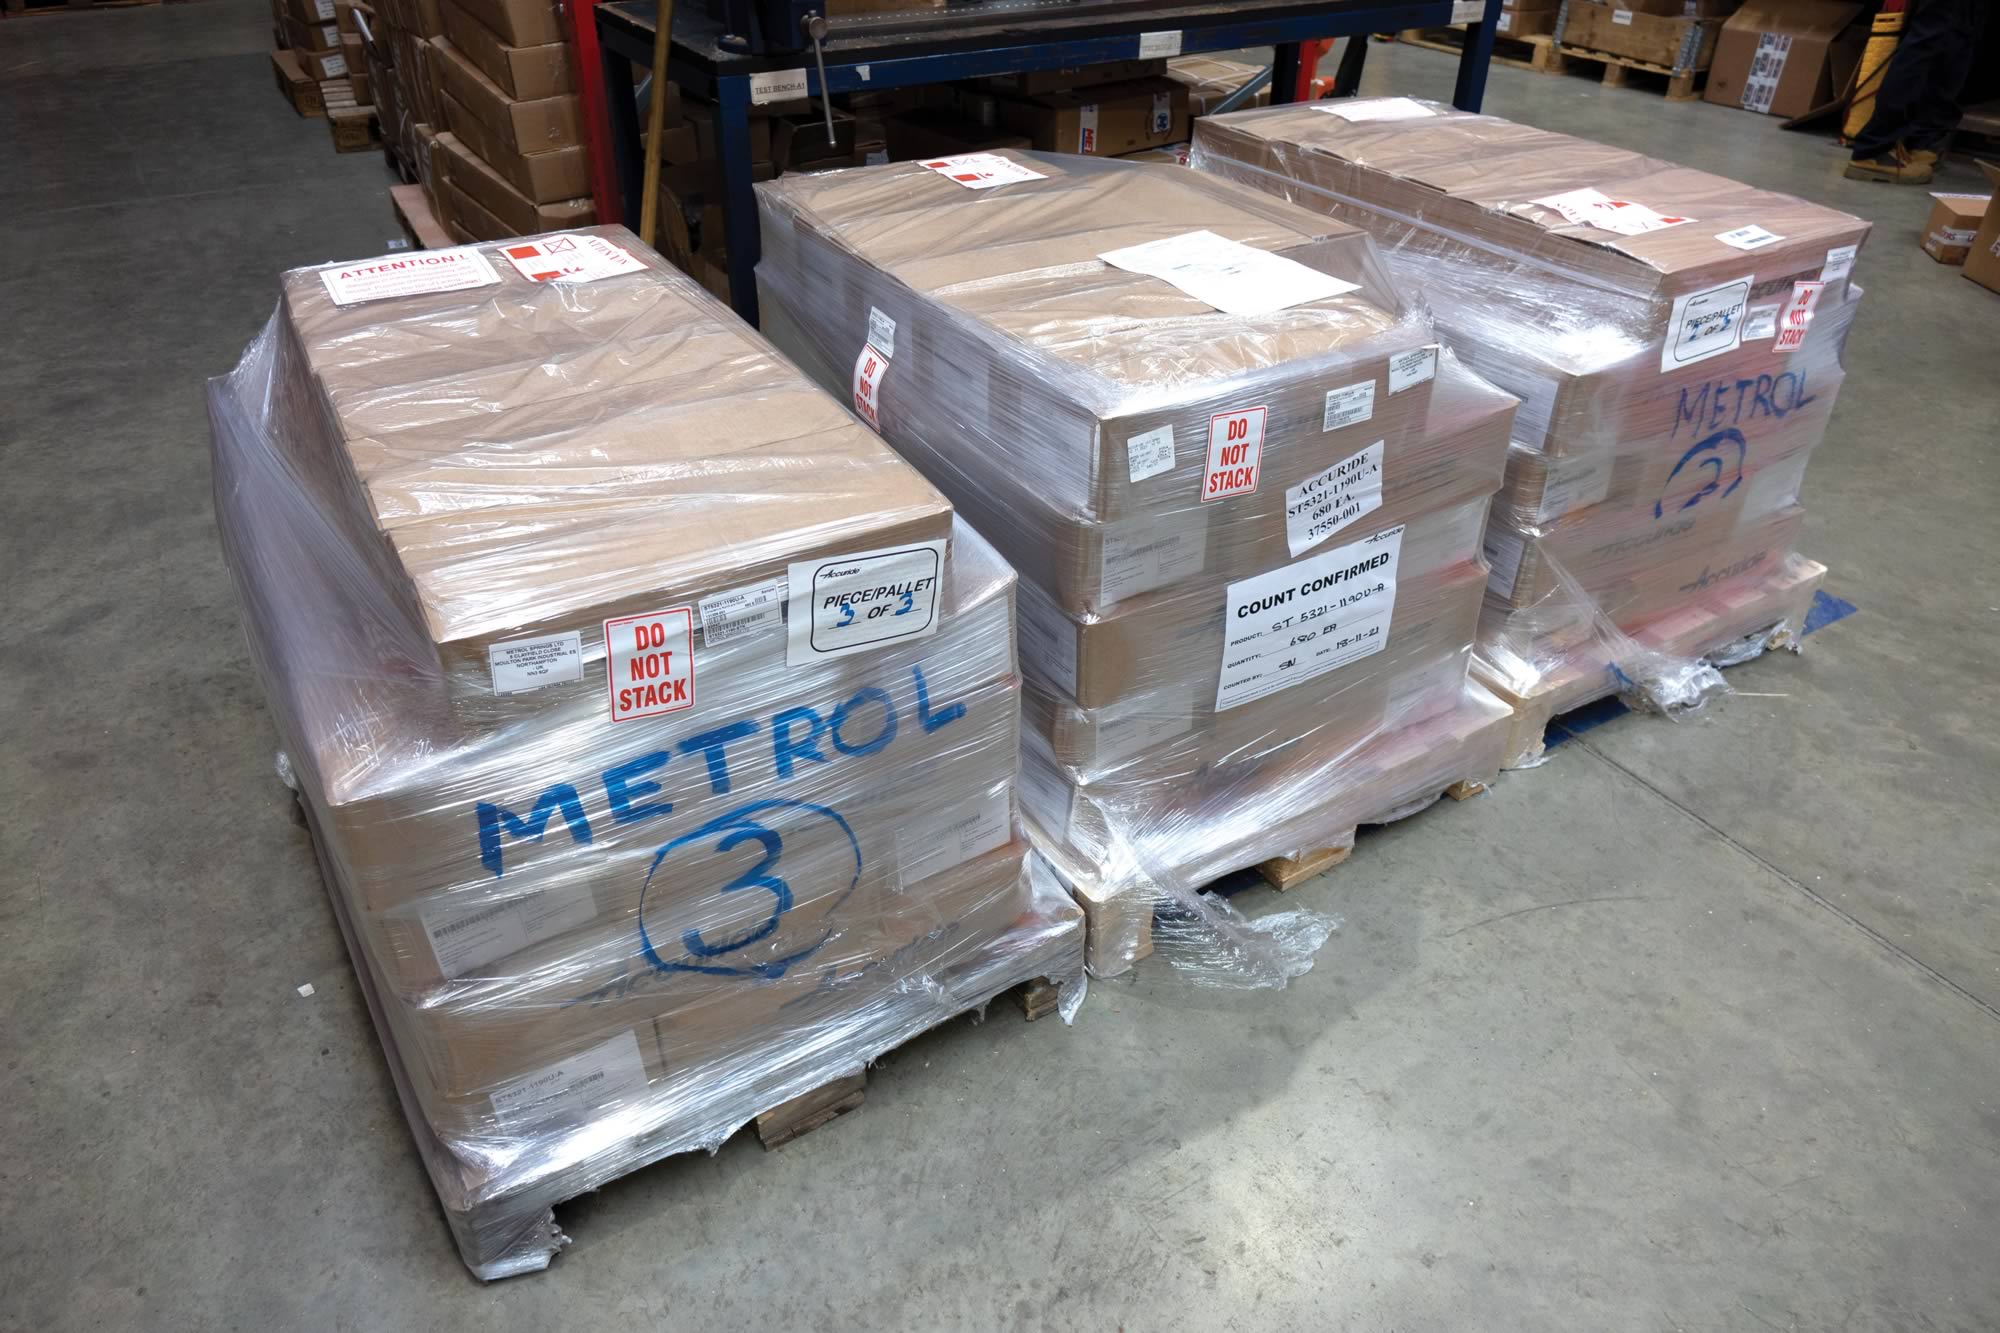 A supply of accuride runners from Metrol